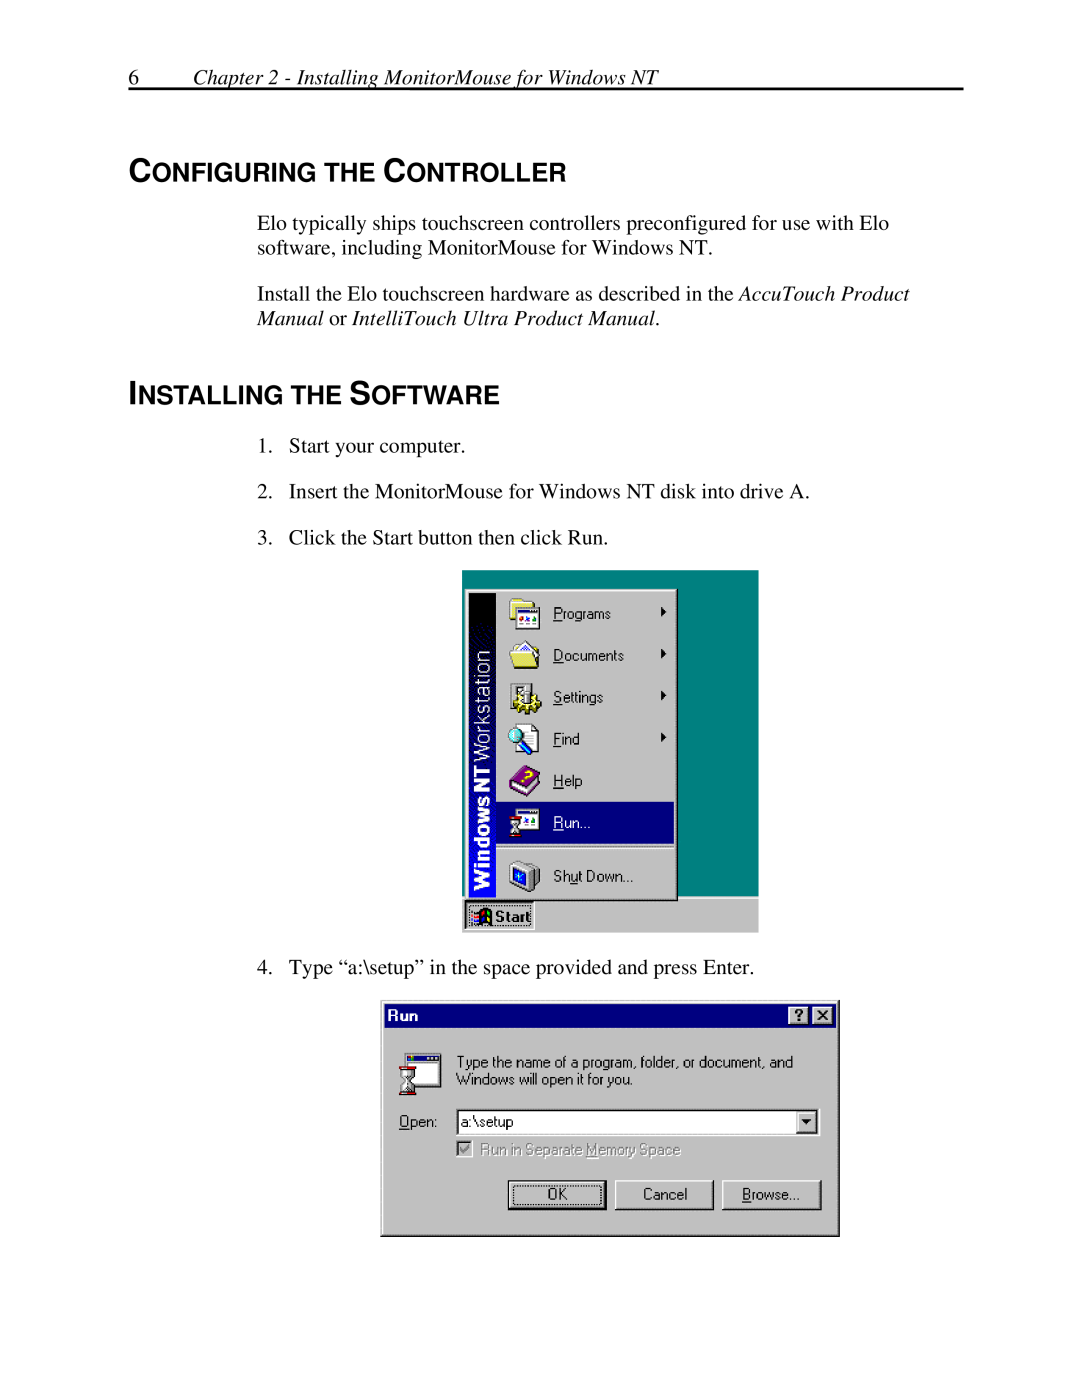 Elo TouchSystems MonitorMouse FOR WINDOWS NT Version 2.0 manual Configuring The Controller, Installing The Software 